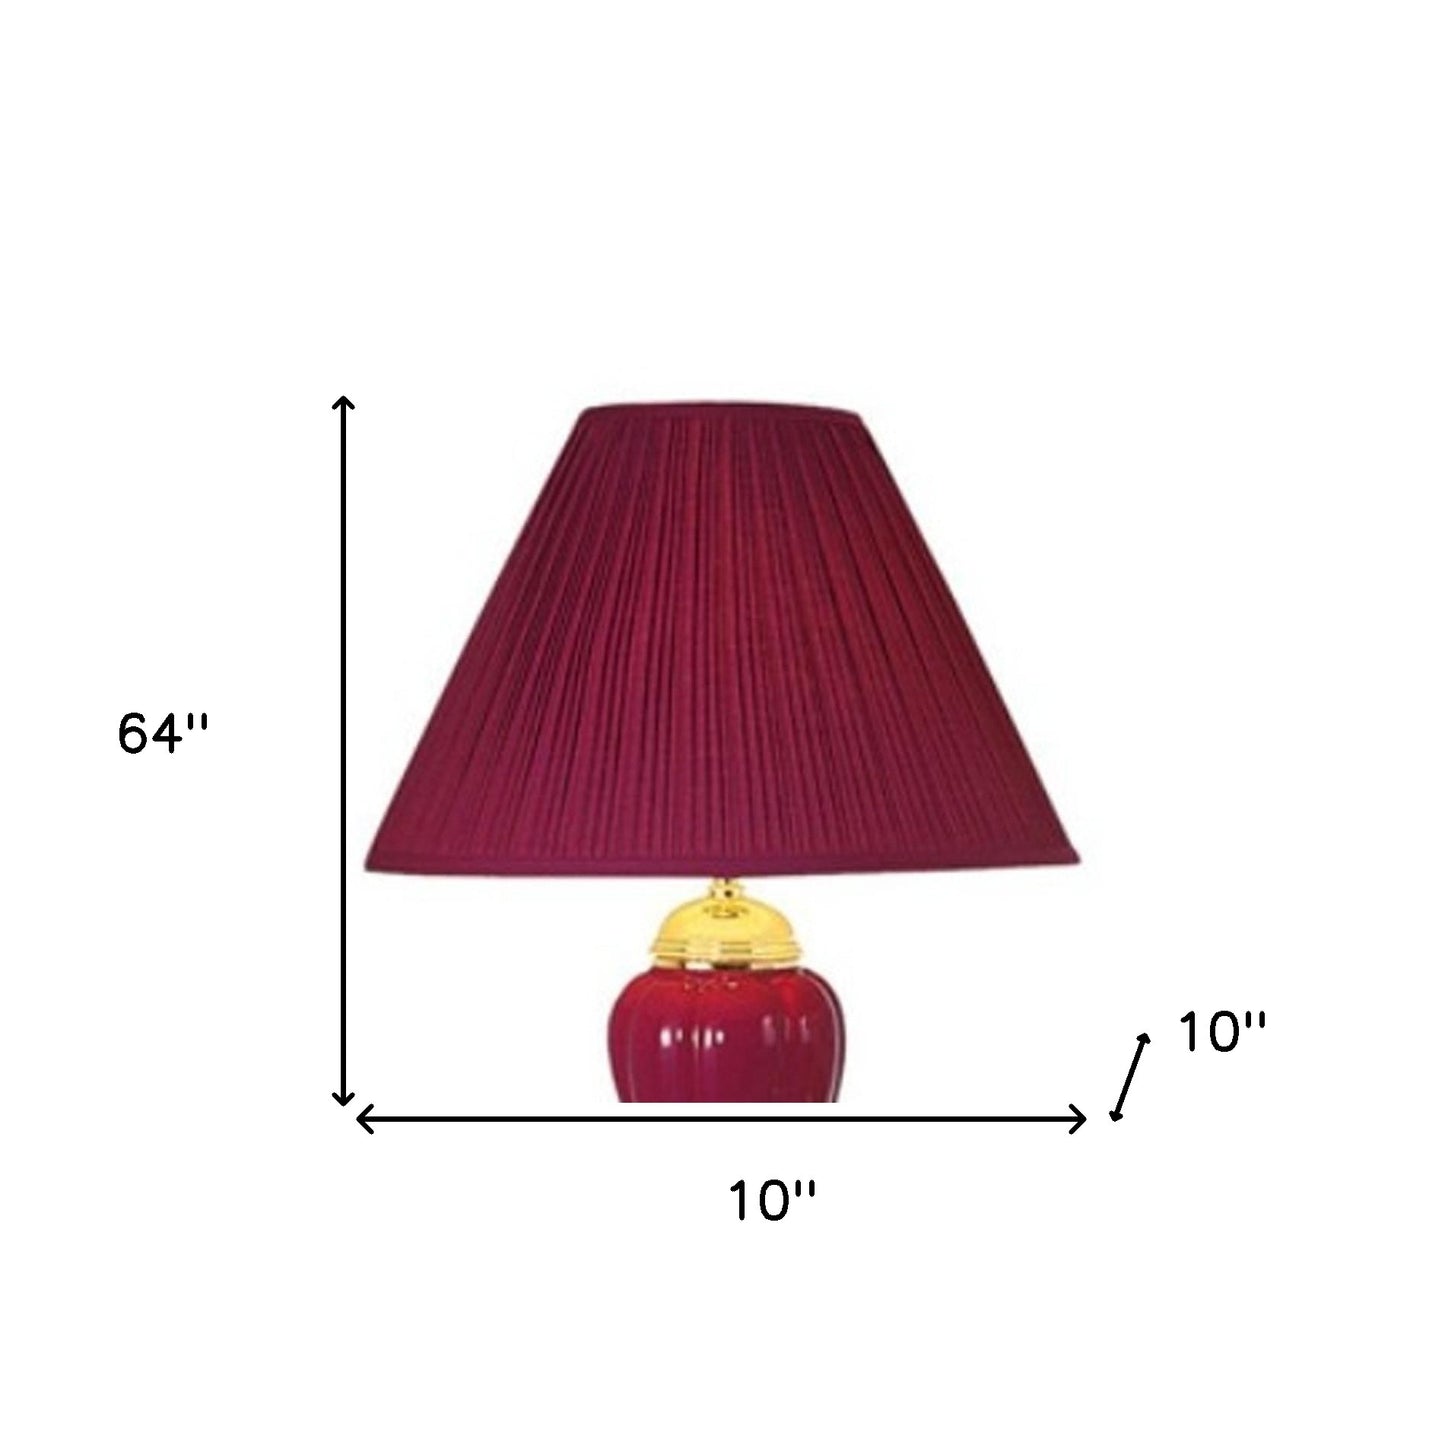 Set Of Three 64" Gold Ceramic Bedside Floor and Table Lamp Set With Red Empire Shade